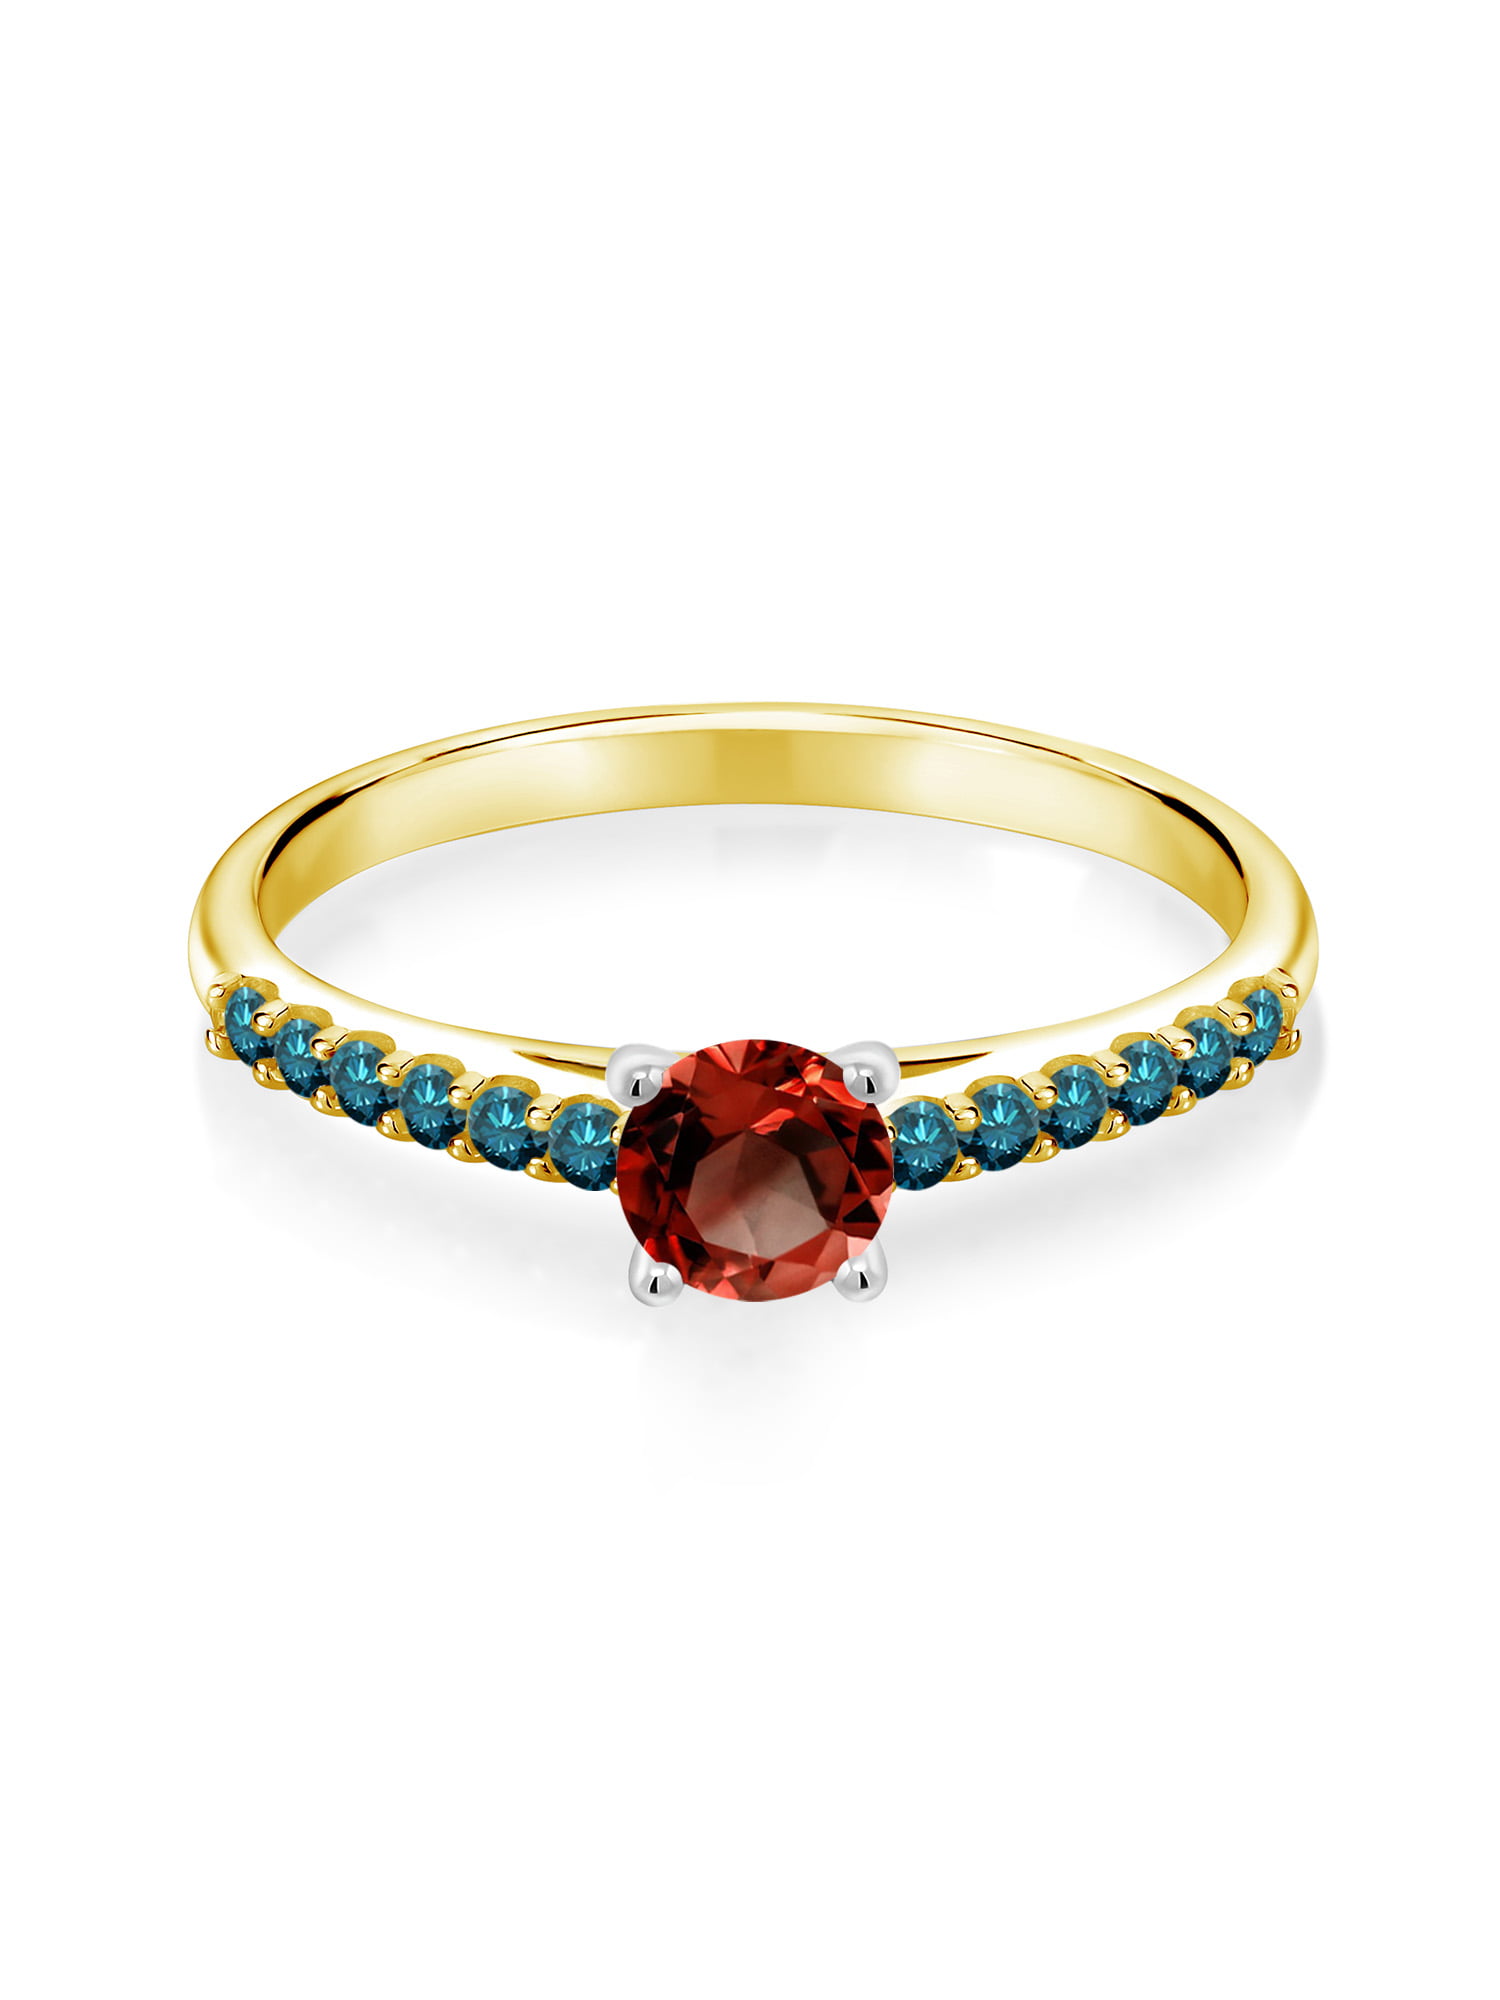 Gem Stone King 1.20 Ct 5mm Round Red Garnet Blue Diamond 10K Yellow Gold  Ring with White Gold Prongs